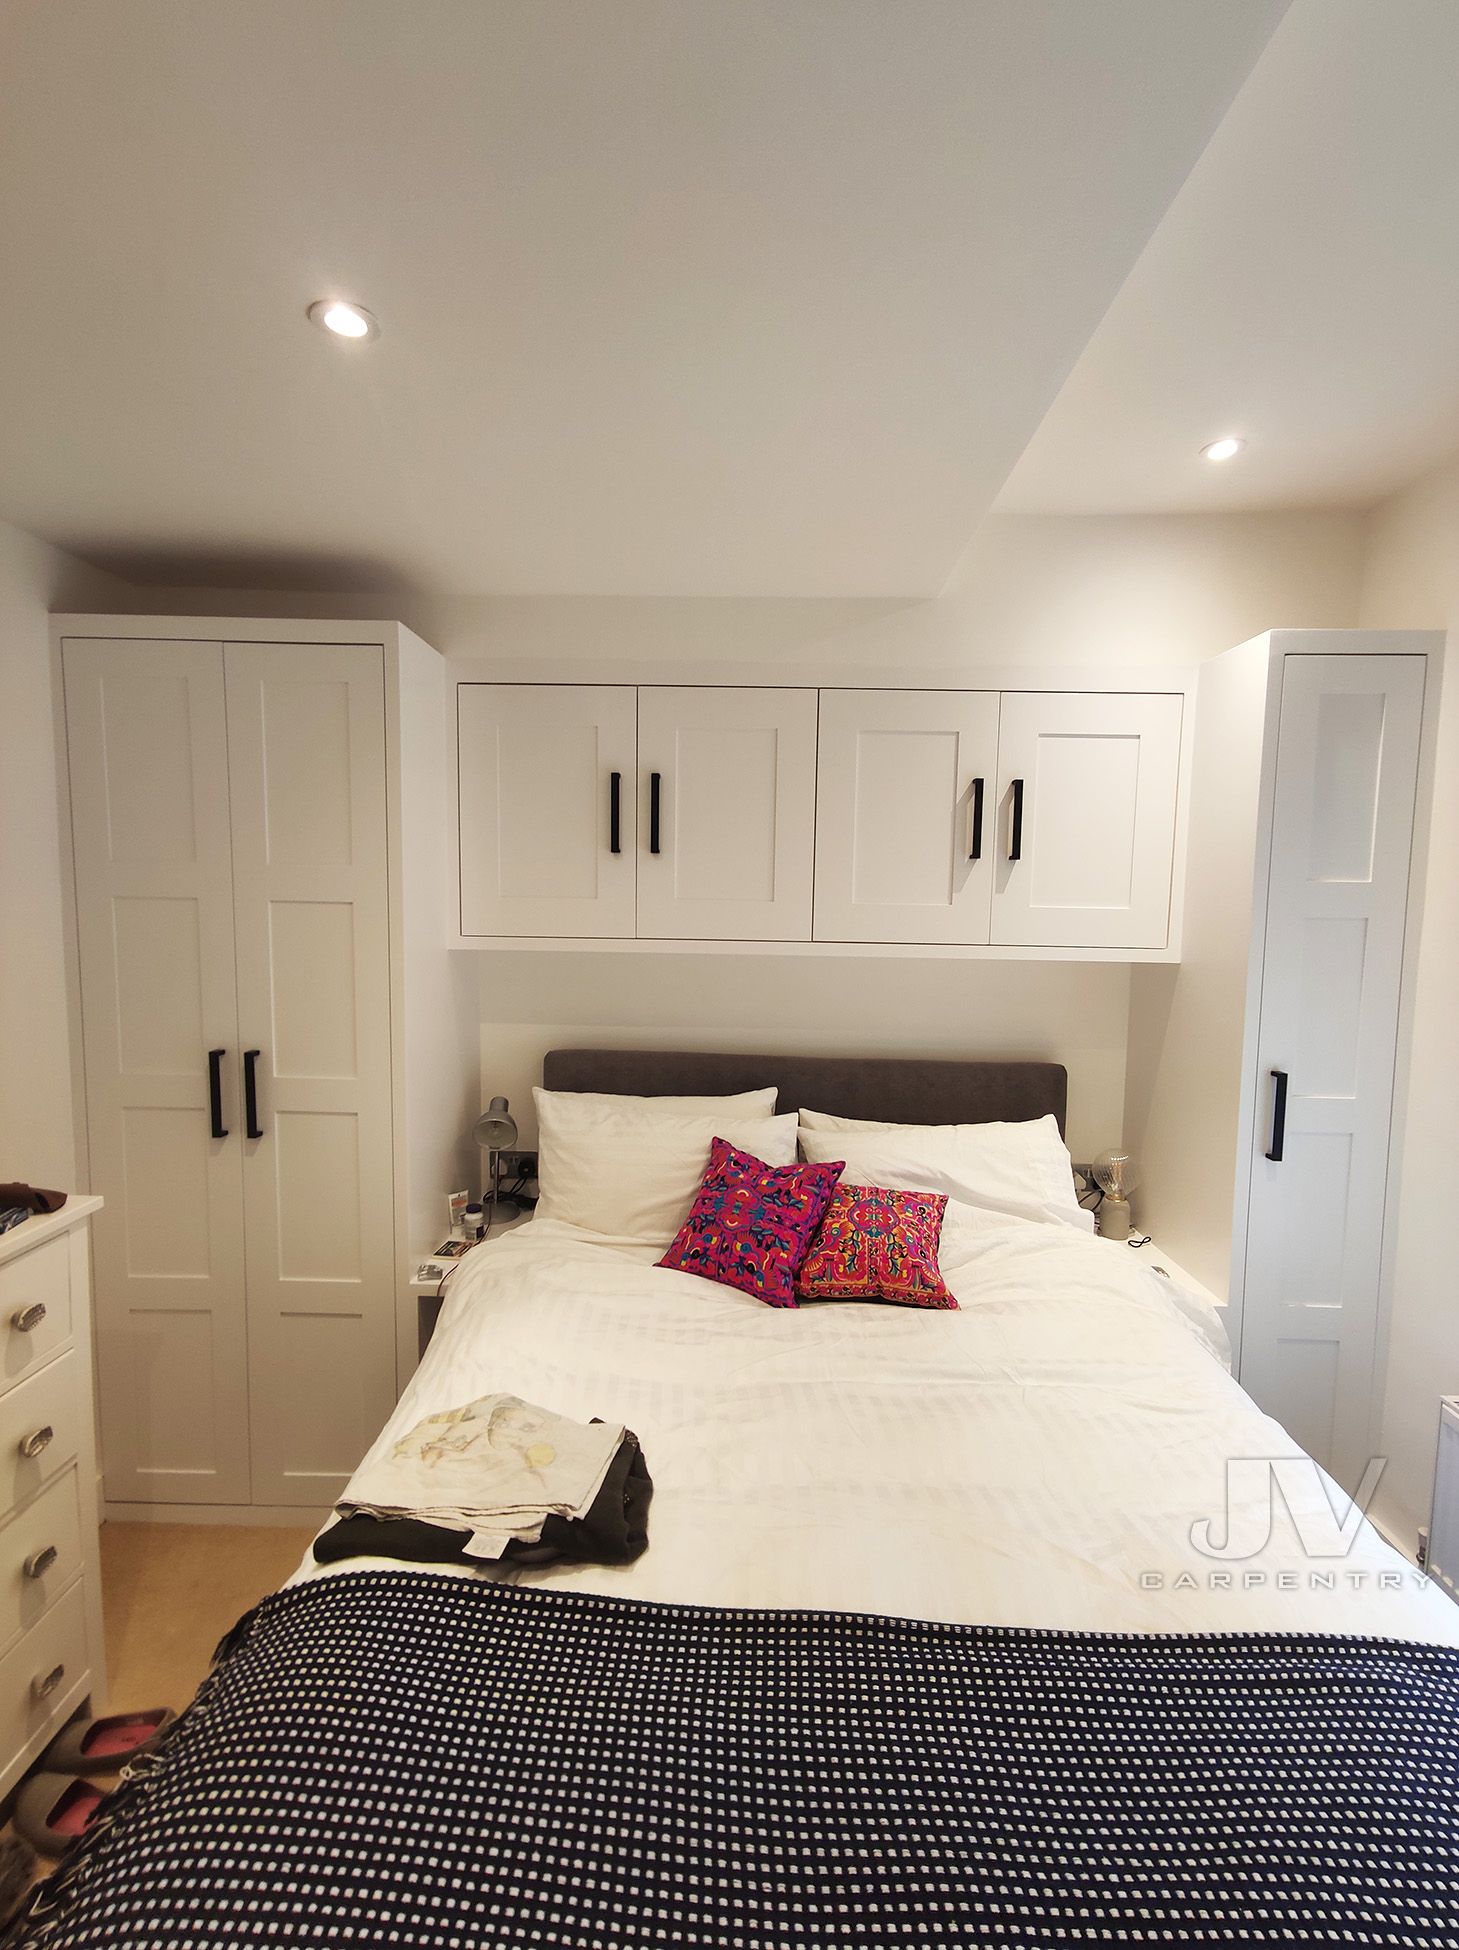 12 Fitted Wardrobes Over Bed Ideas For Your Bedroom | Jv Carpentry Pertaining To Wardrobes Beds (View 5 of 15)